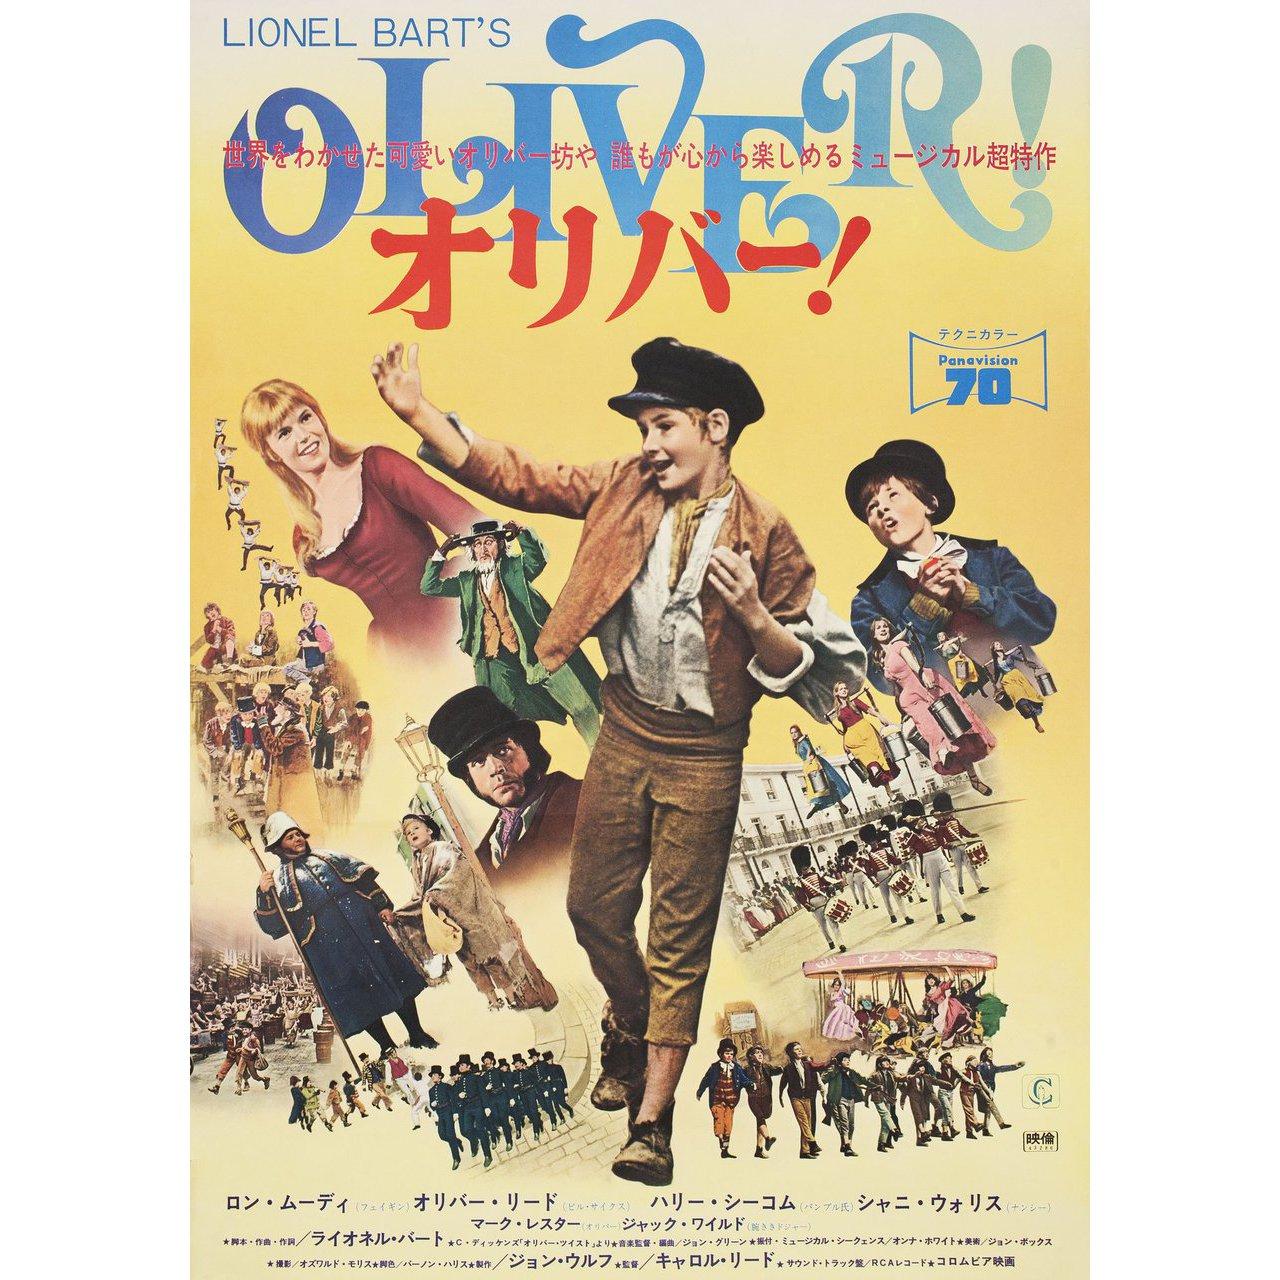 Original 1968 Japanese B2 poster for the film Oliver! directed by Carol Reed with Ron Moody / Shani Wallis / Oliver Reed / Harry Secombe. Very Good-Fine condition, folded. Many original posters were issued folded or were subsequently folded. Please